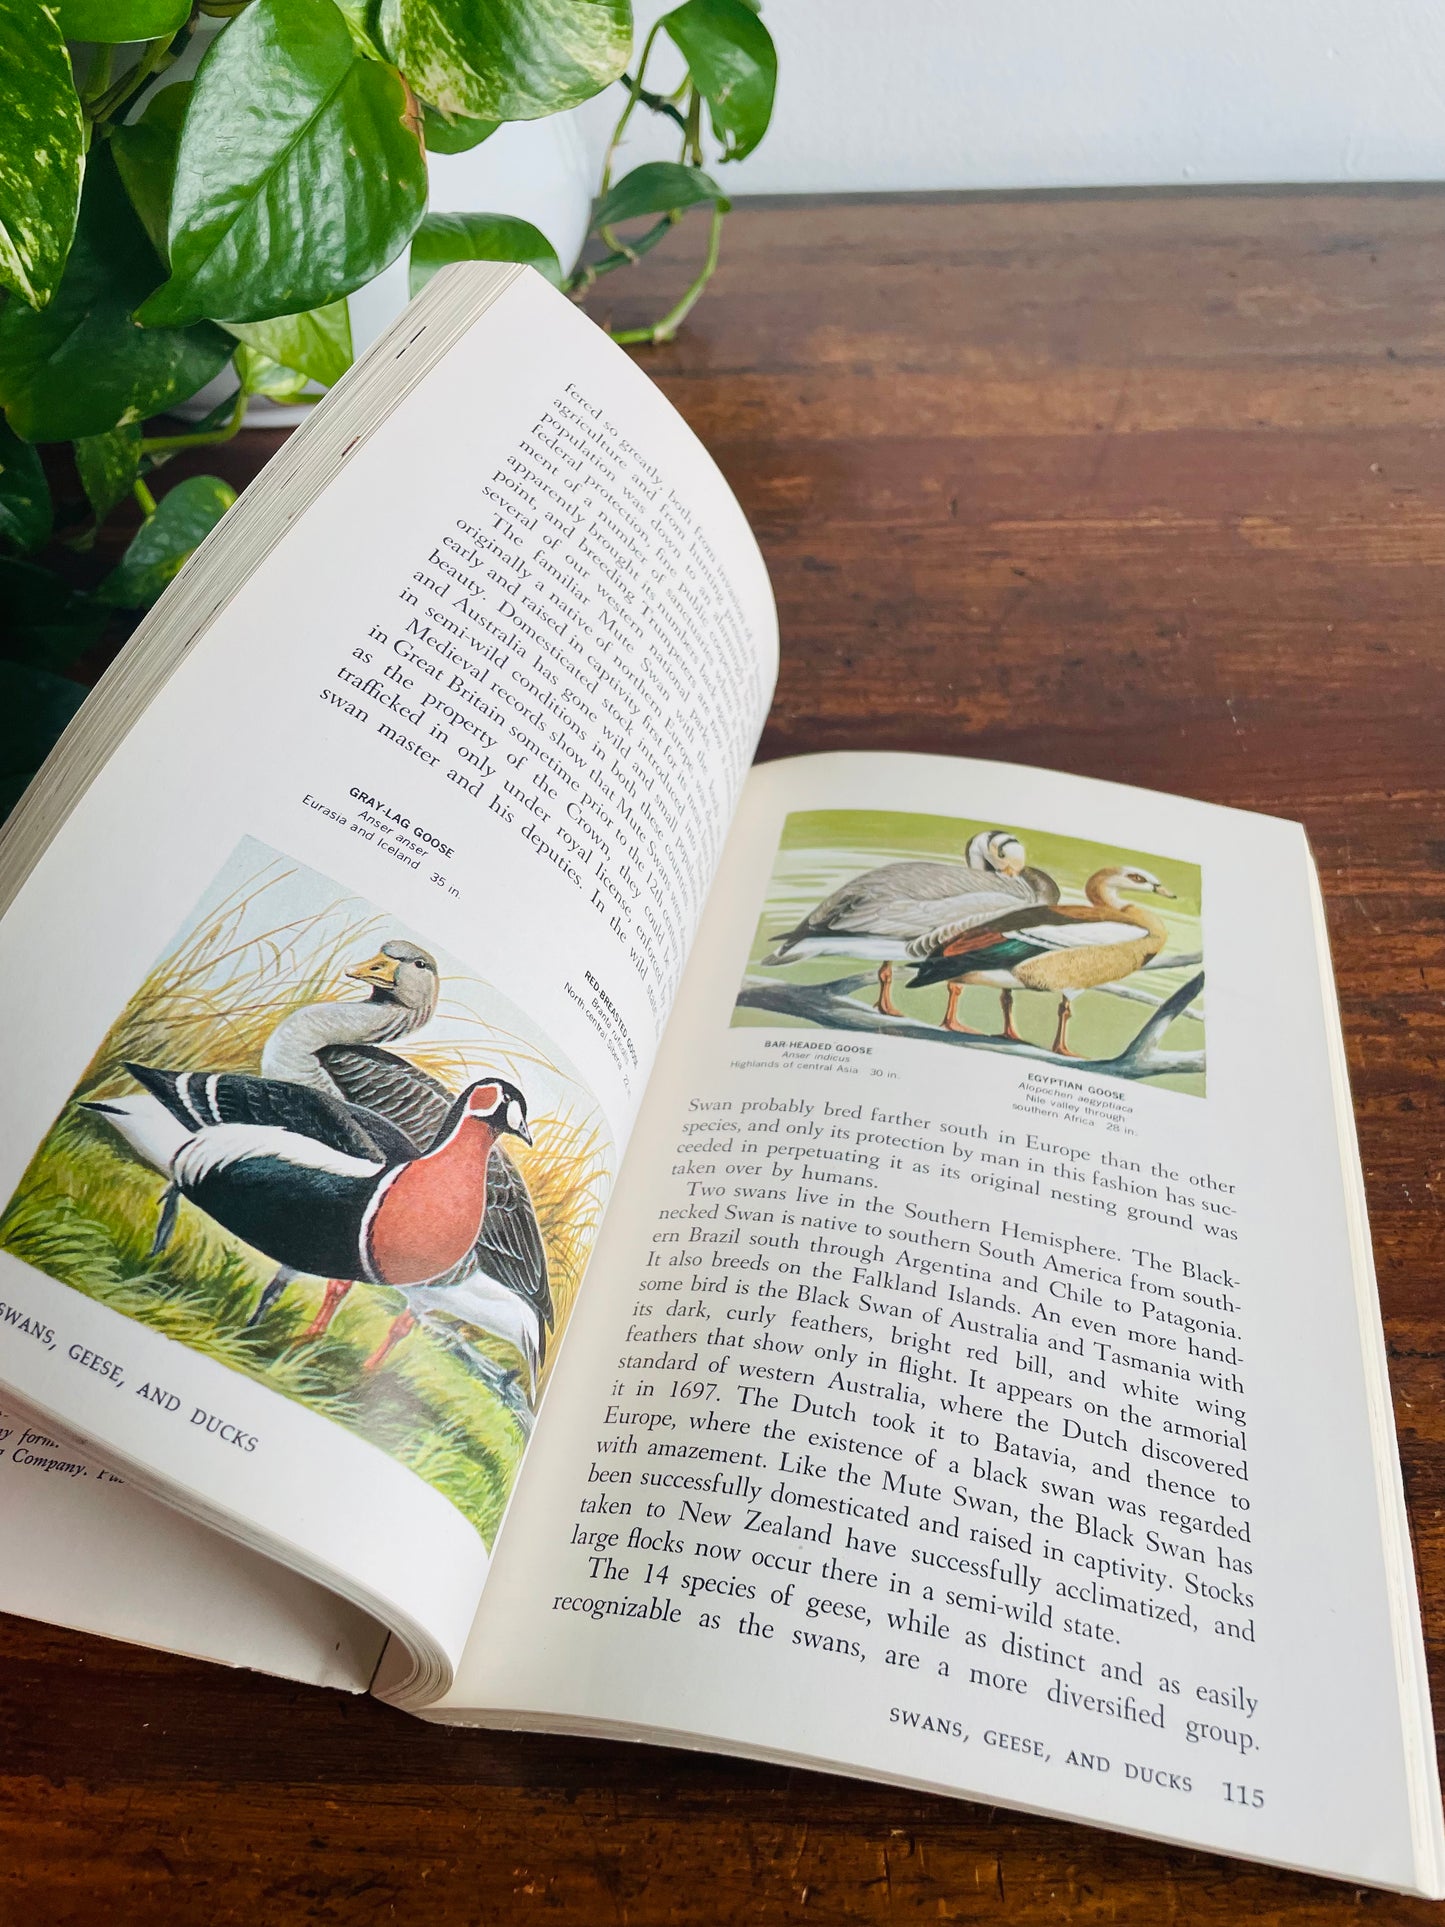 Water And Marsh Birds of The World Book by Oliver L. Austin, Jr. & Illustrated by Arthur Singer (1967)